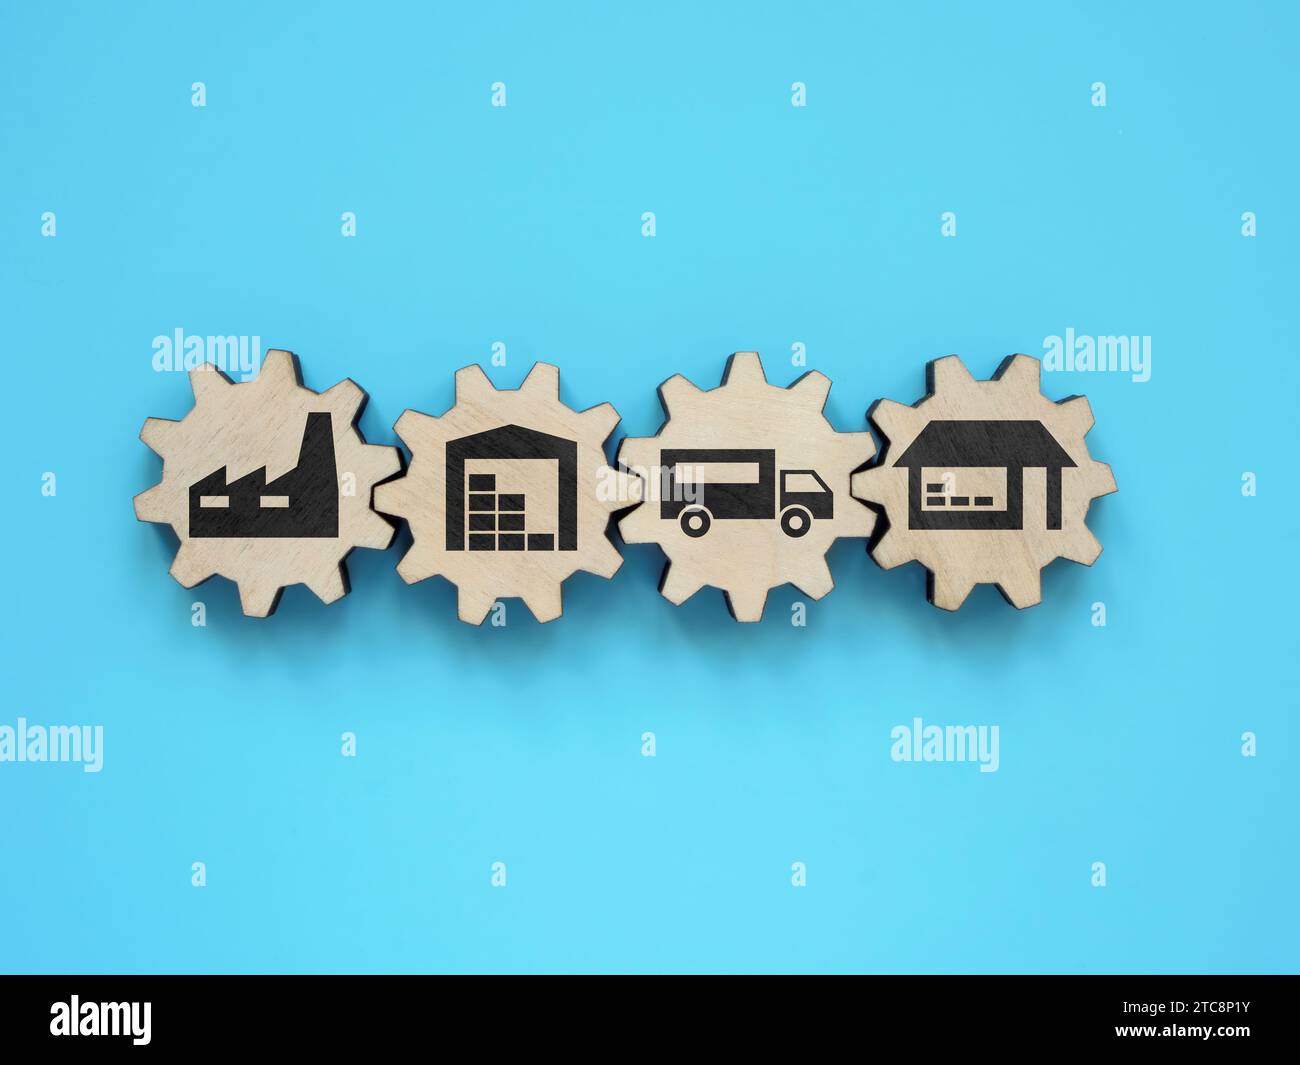 Supply chain management. Gear wheels with signs of factory, warehouse and transport. Stock Photo